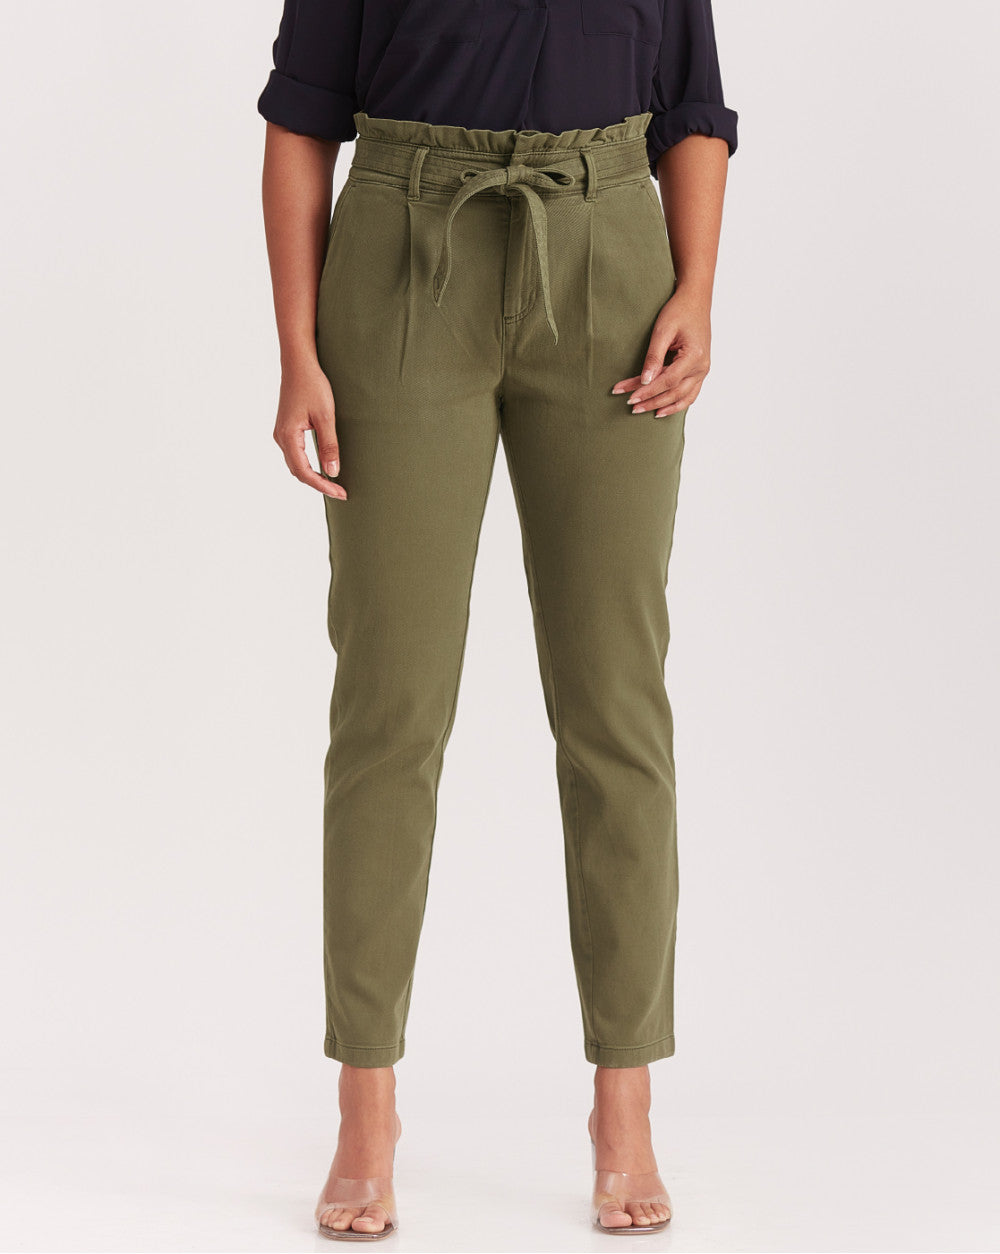 Tapered Fit Juan Tapered Garment-Dyed Pants - Army Green